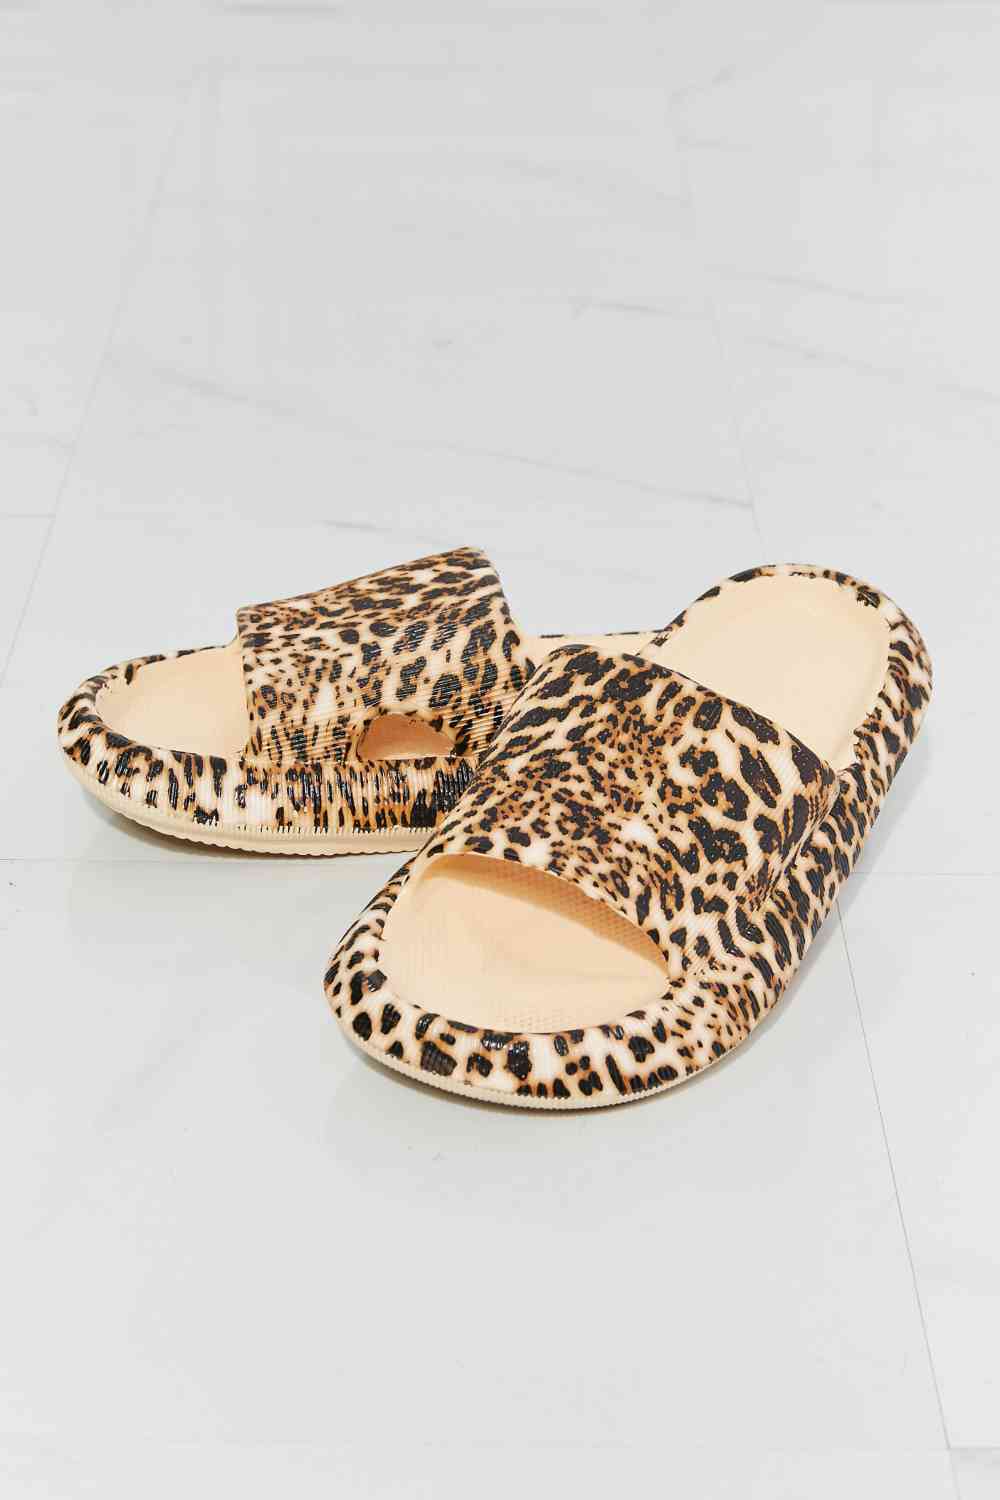 MMShoes Arms Around Me Open Toe Slide in Leopard No 5